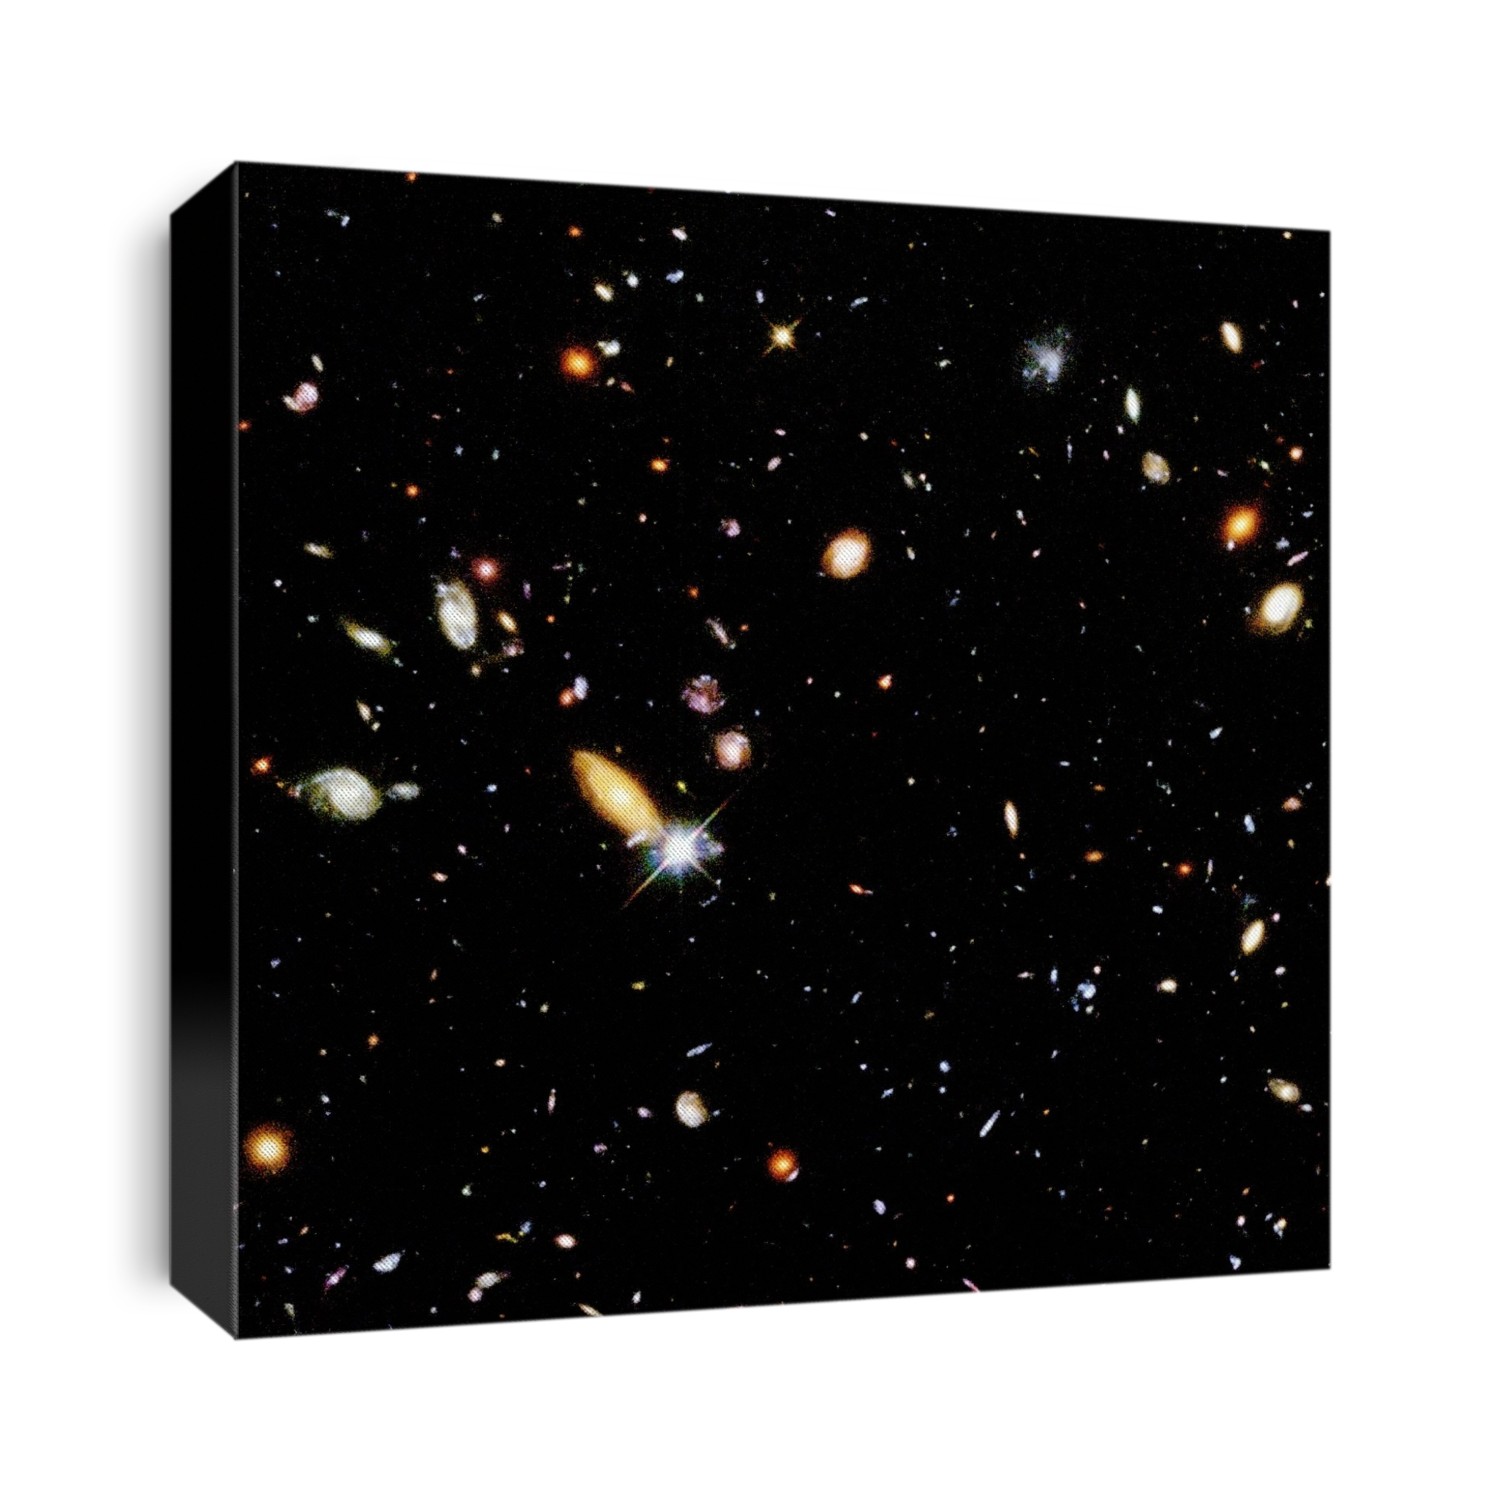 Part of the Hubble Deep Field, 1995. Hubble Space Telescope (HST) deep-view image of several hundred extremely distant galaxies. This image is the lower left segment of the original Hubble Deep Field (HDF) survey of 1995, at the time the deepest view yet into the universe. The most distant of these galaxies are around 12 billion light years away, meaning their light has travelled across about three-quarters of the known universe to reach Earth. These galaxies lie in the northern constellation Ursa Major. This image was produced with data from the Wide Field and Planetary Camera 2 (WFPC2) after a ten-day exposure in December 1995.